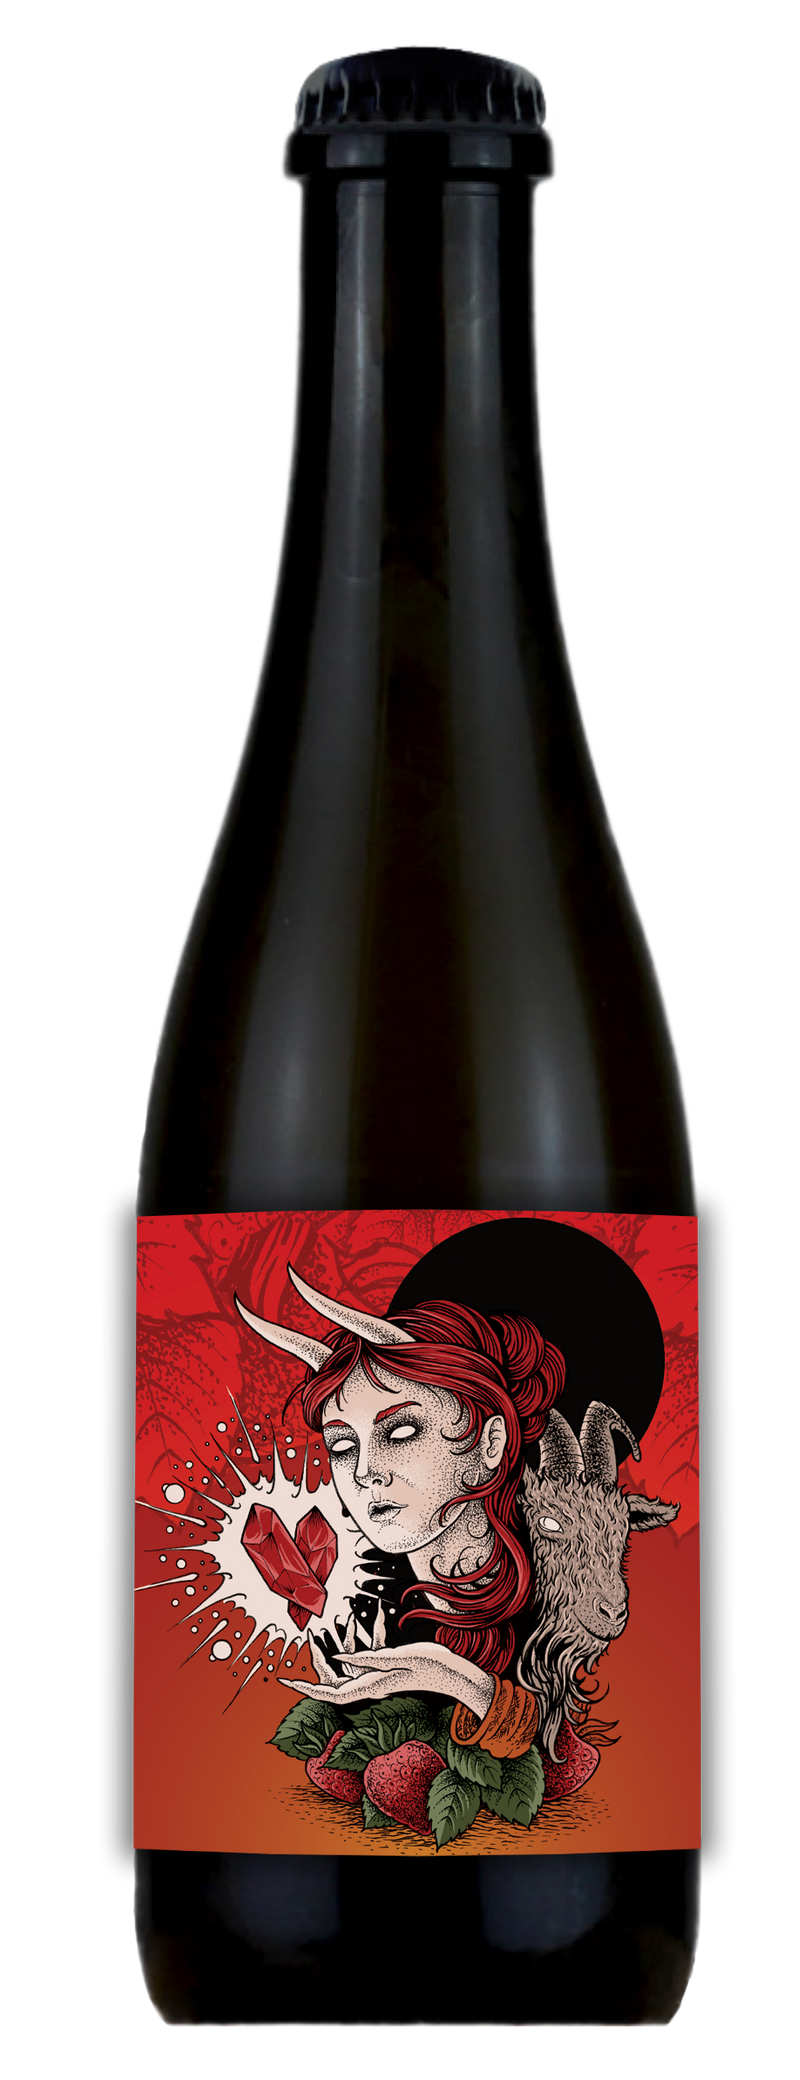 Holy Goat - Blood Witch - Oud Bruin With Strawberries